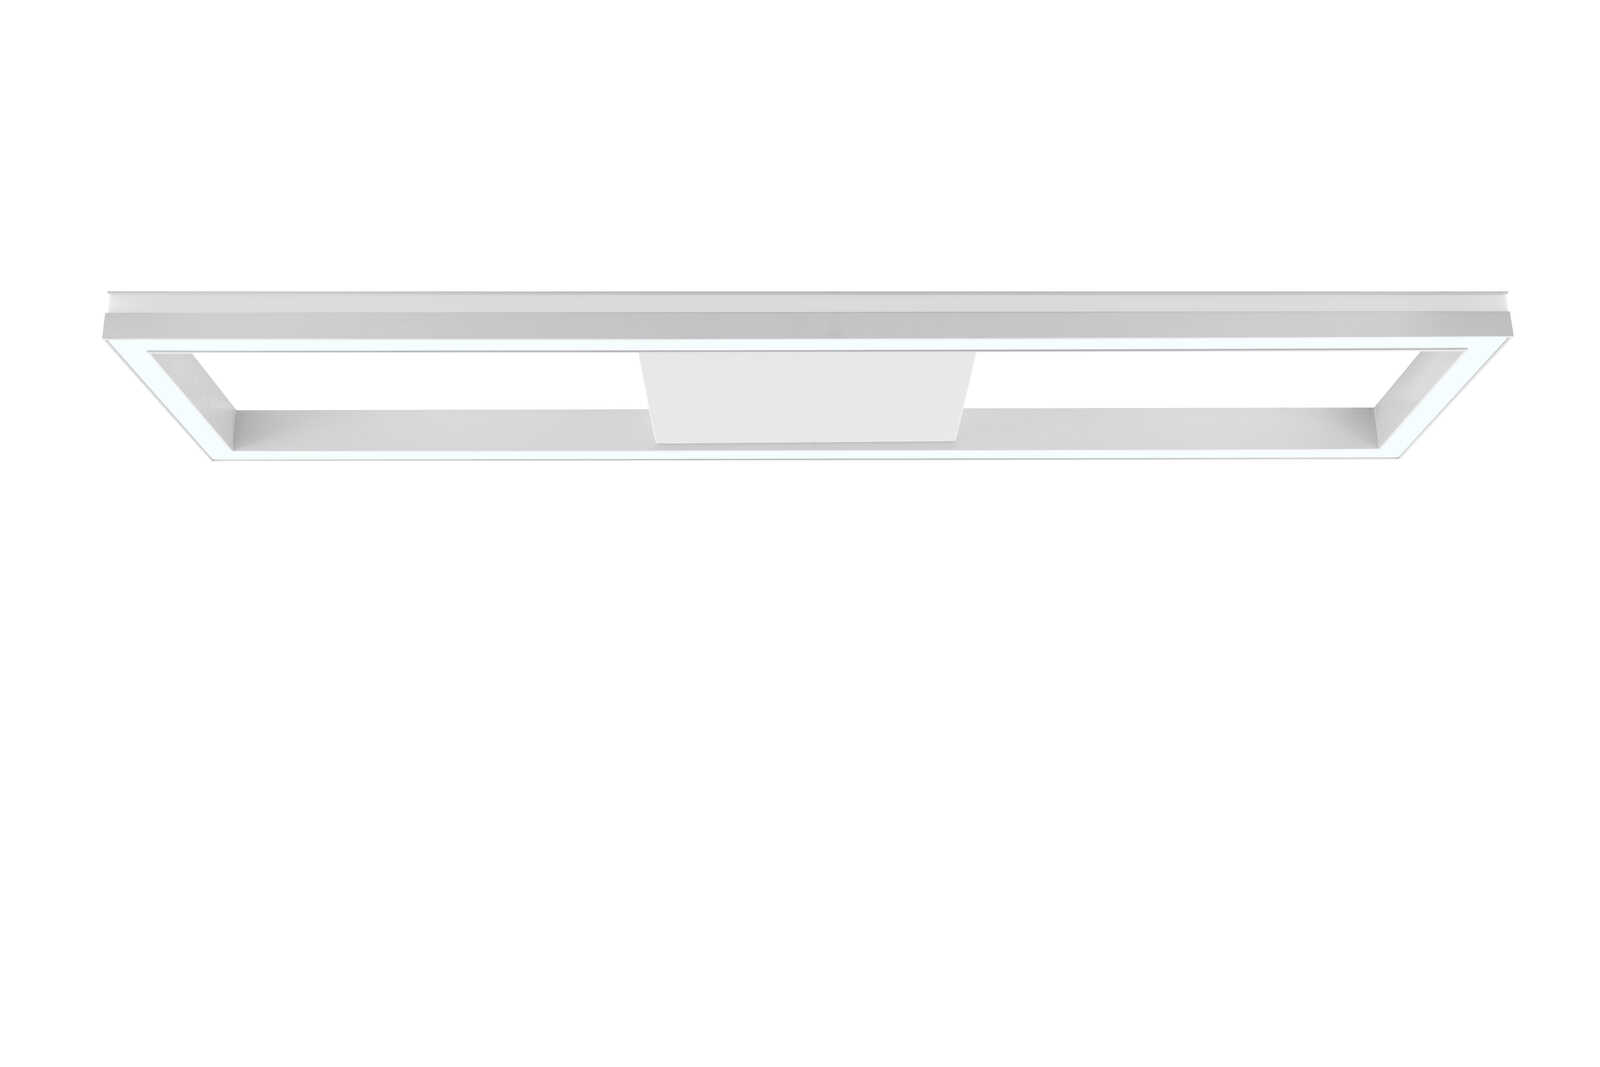             Plastic wall and ceiling light - Janis 5 - White
        